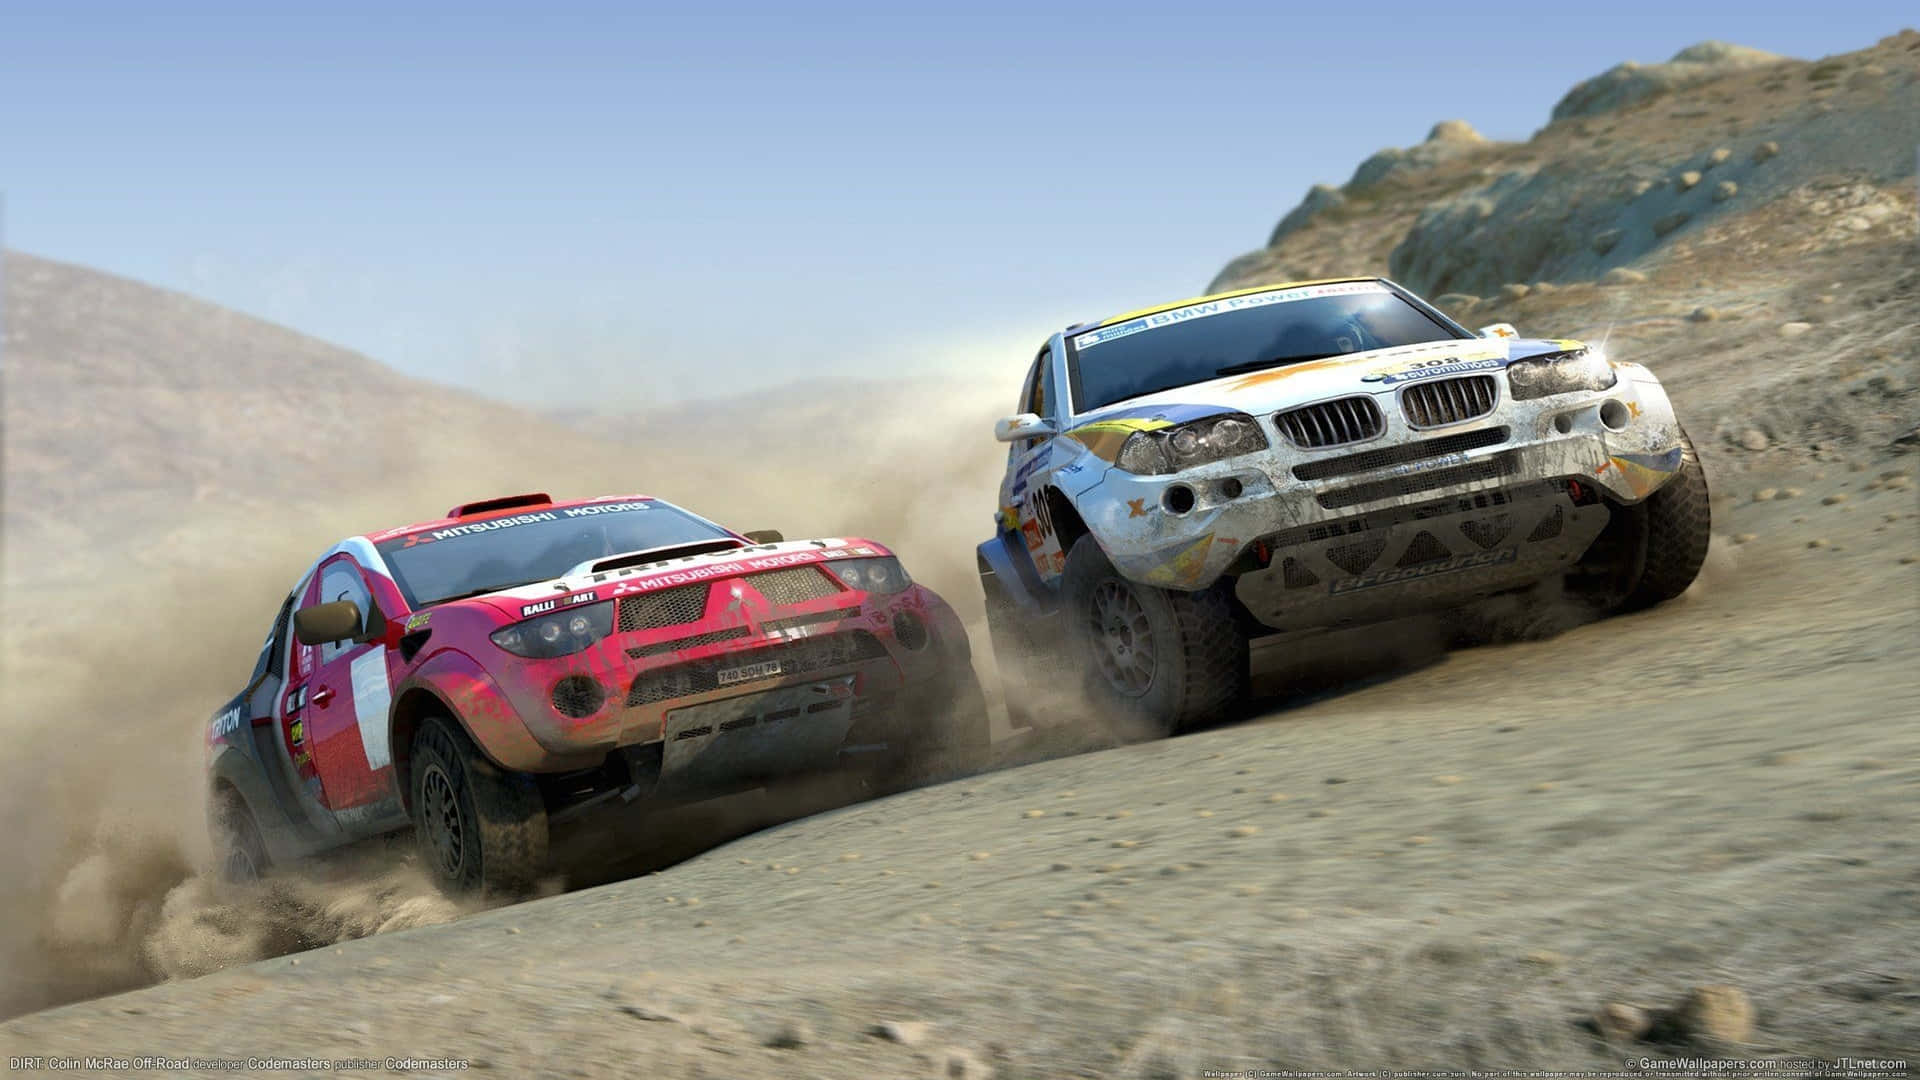 Two Vehicles Are Racing On A Dirt Road